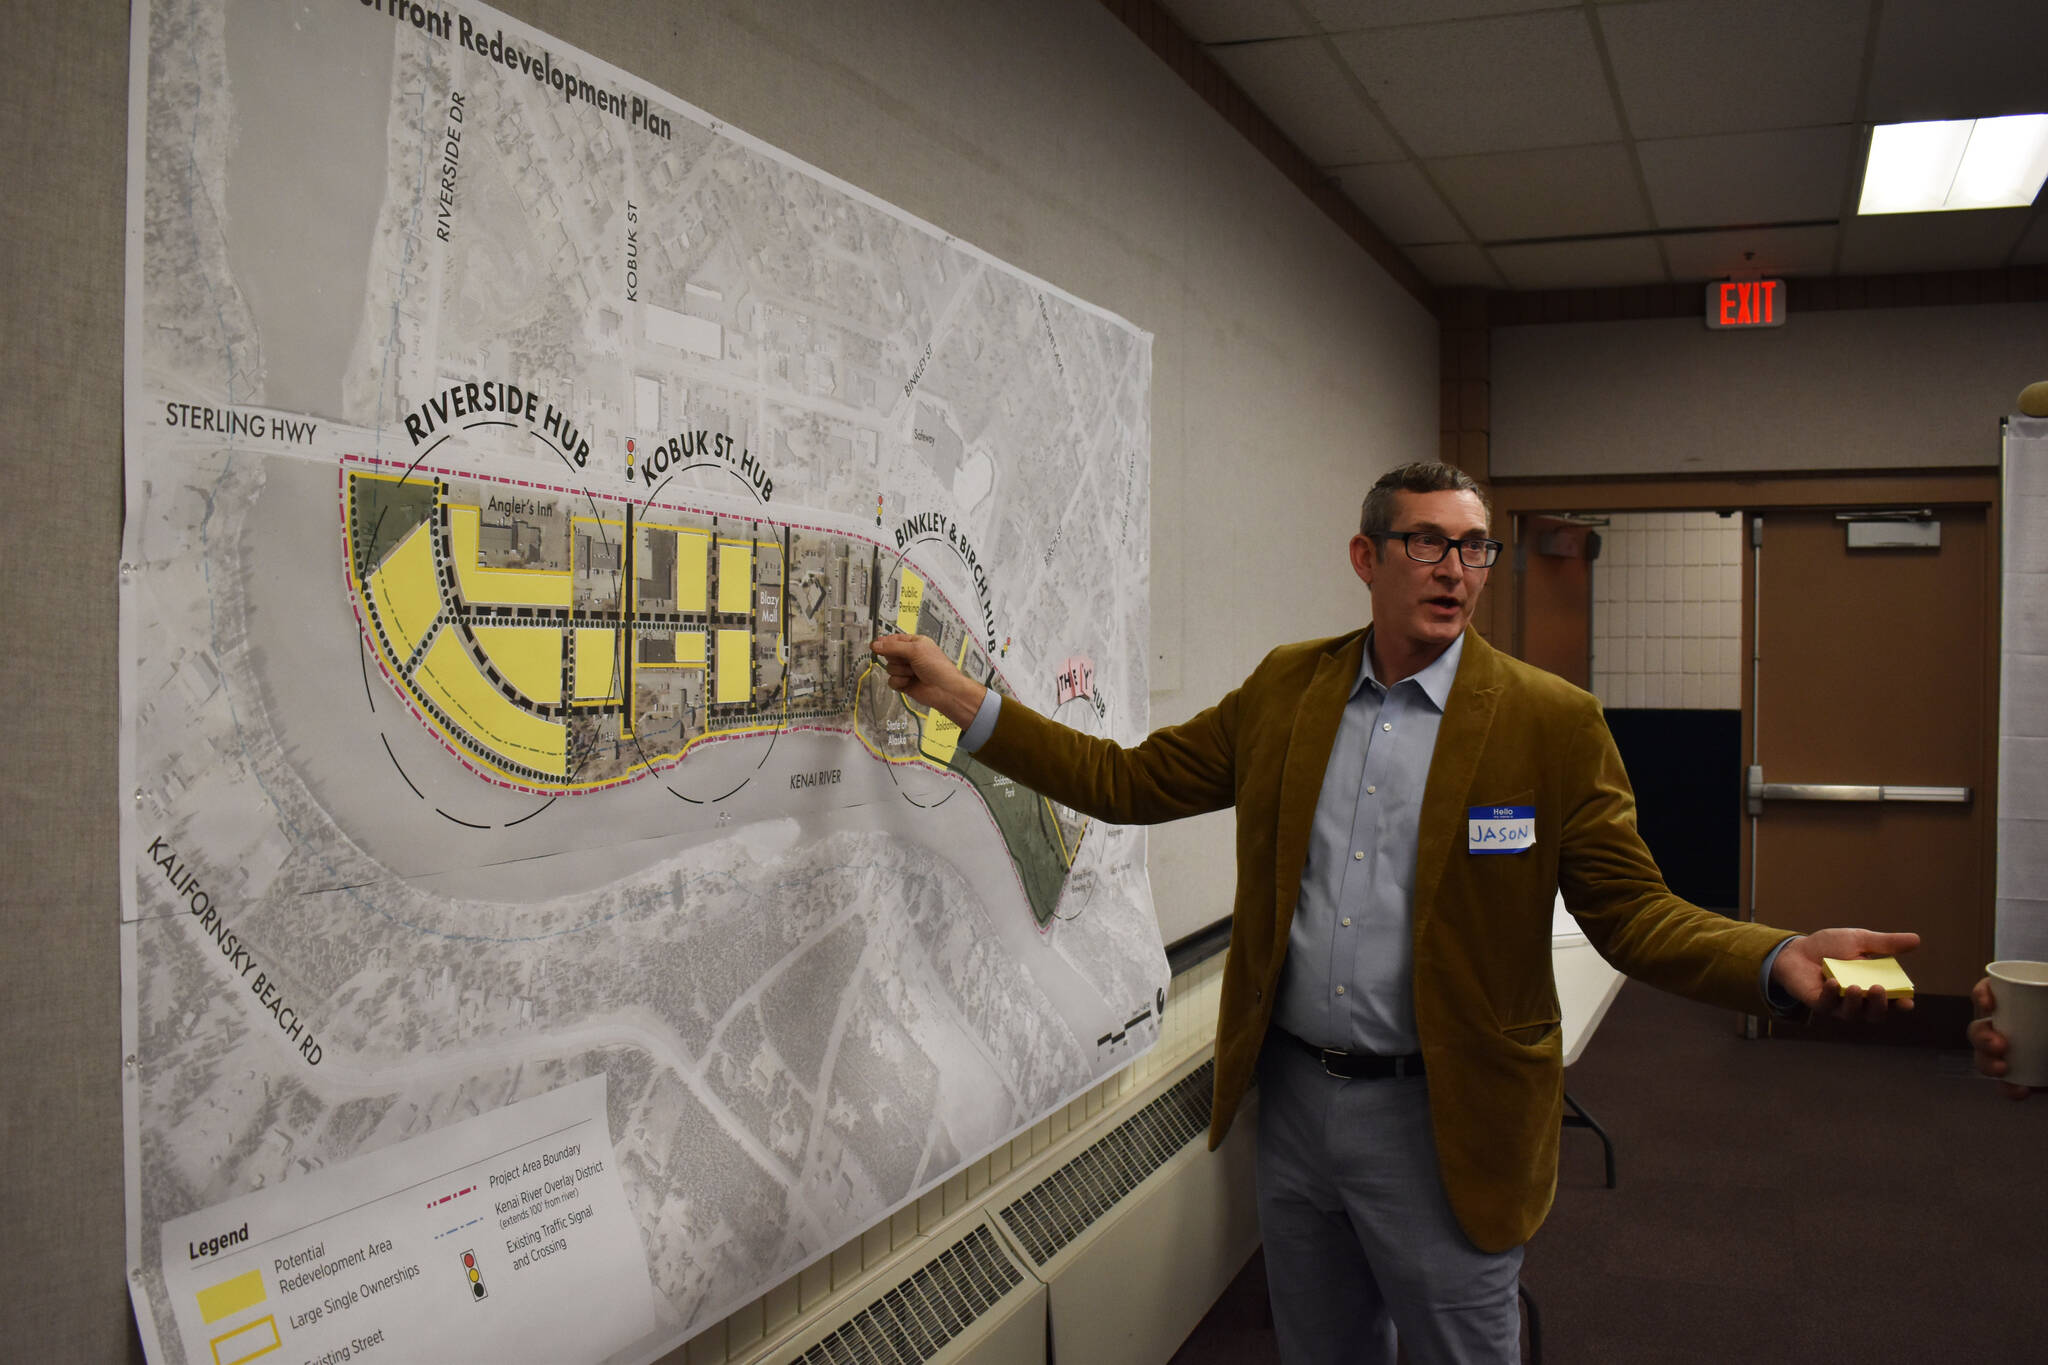 Project Manager Jason Graf points to a map while answering questions from attendees on Thursday, Jan. 12, 2023, at the Soldotna Riverfront Redevelopment Open House at the Soldotna Regional Sports Complex in Soldotna, Alaska. (Jake Dye/Peninsula Clarion)